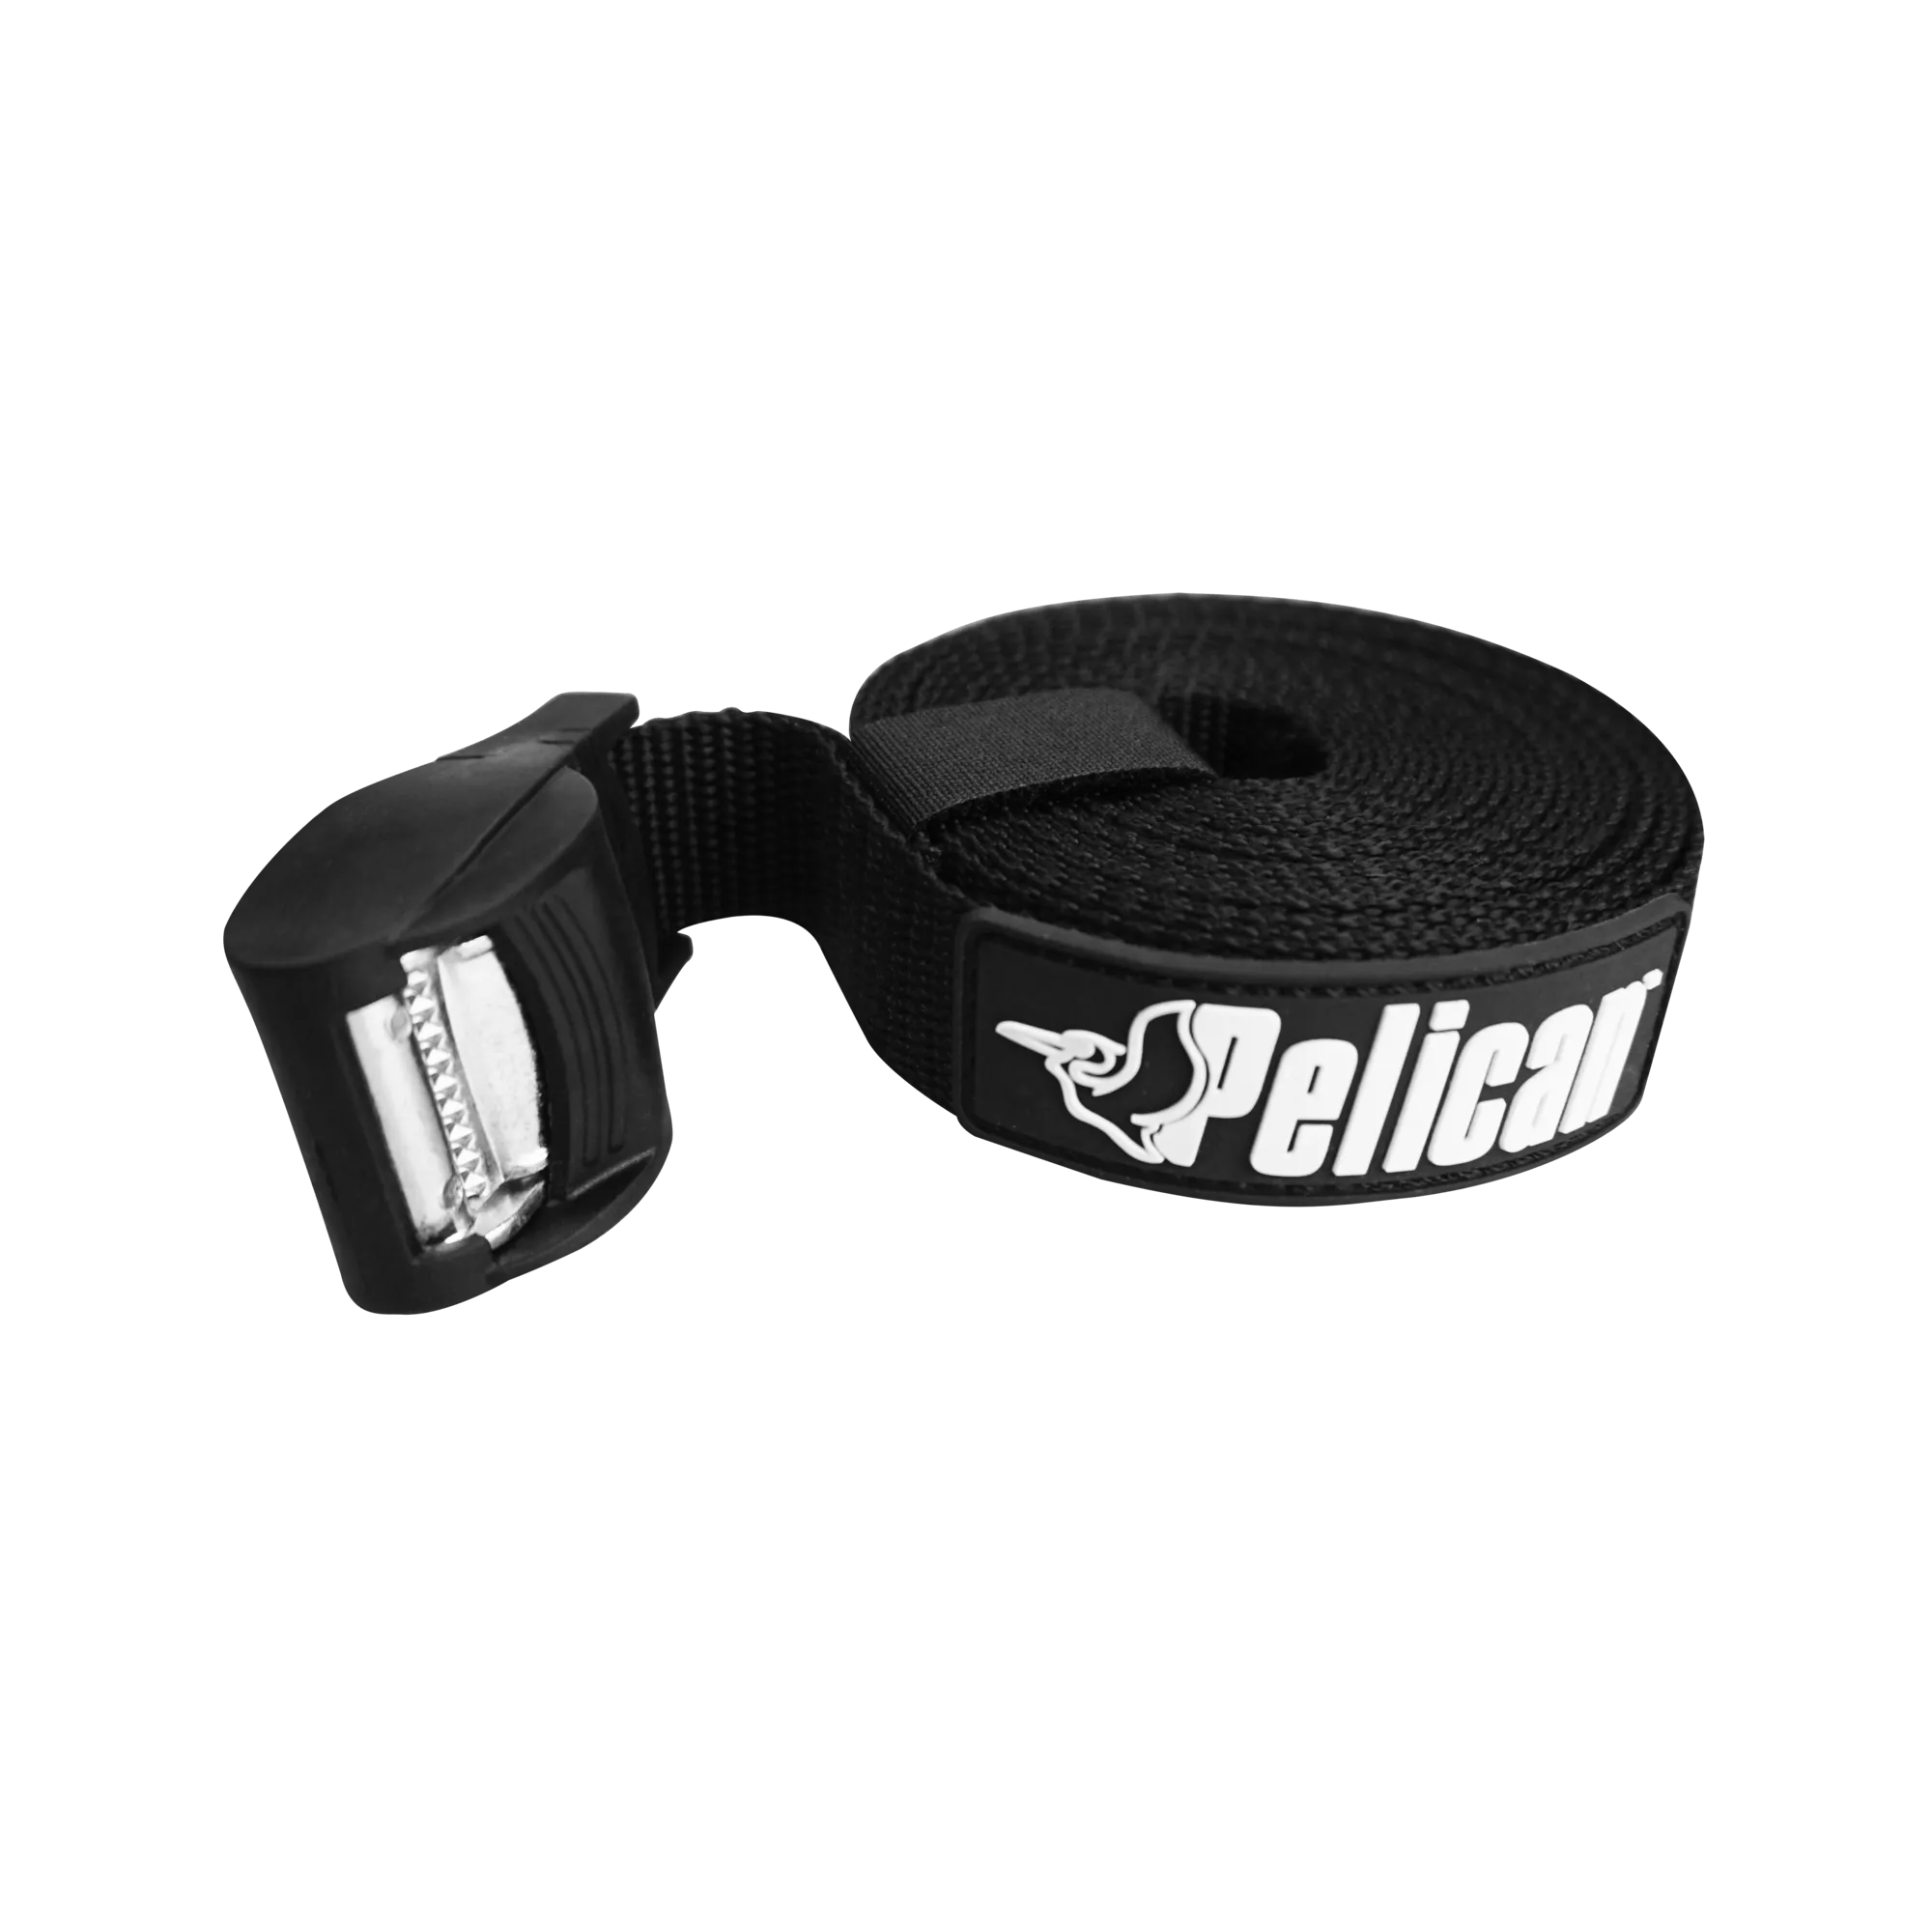 PELICAN - SUP and Kayak Tie-Down Cargo Strap 4,6 m (15') - Black - PS1955 - ISO